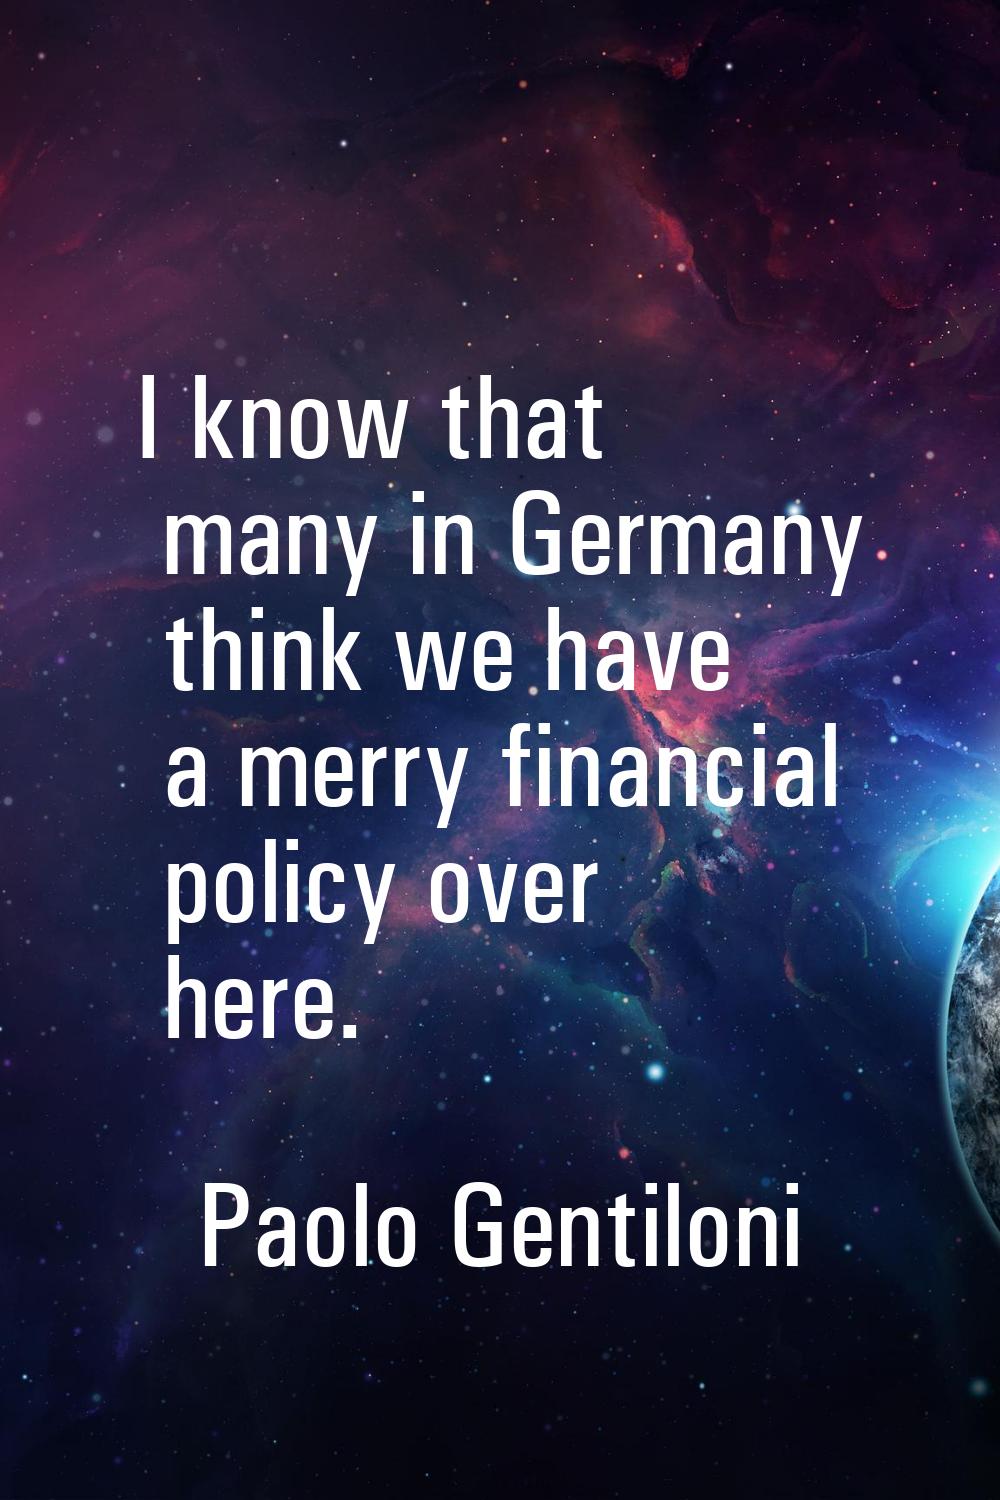 I know that many in Germany think we have a merry financial policy over here.